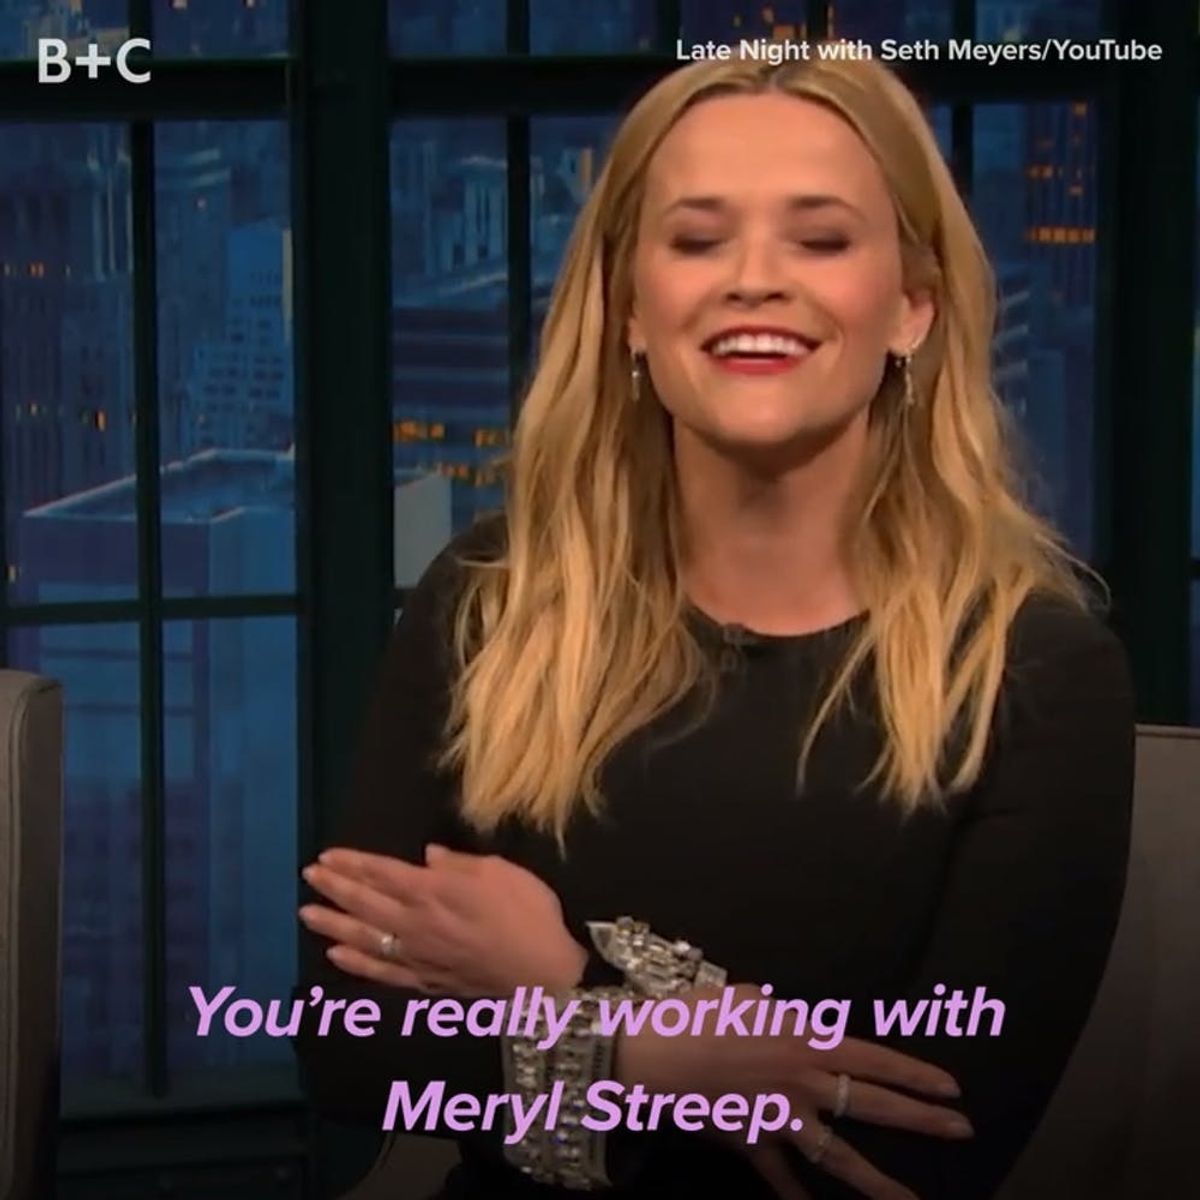 Proof That Celebs Love Meryl Streep As Much As the Rest of Us